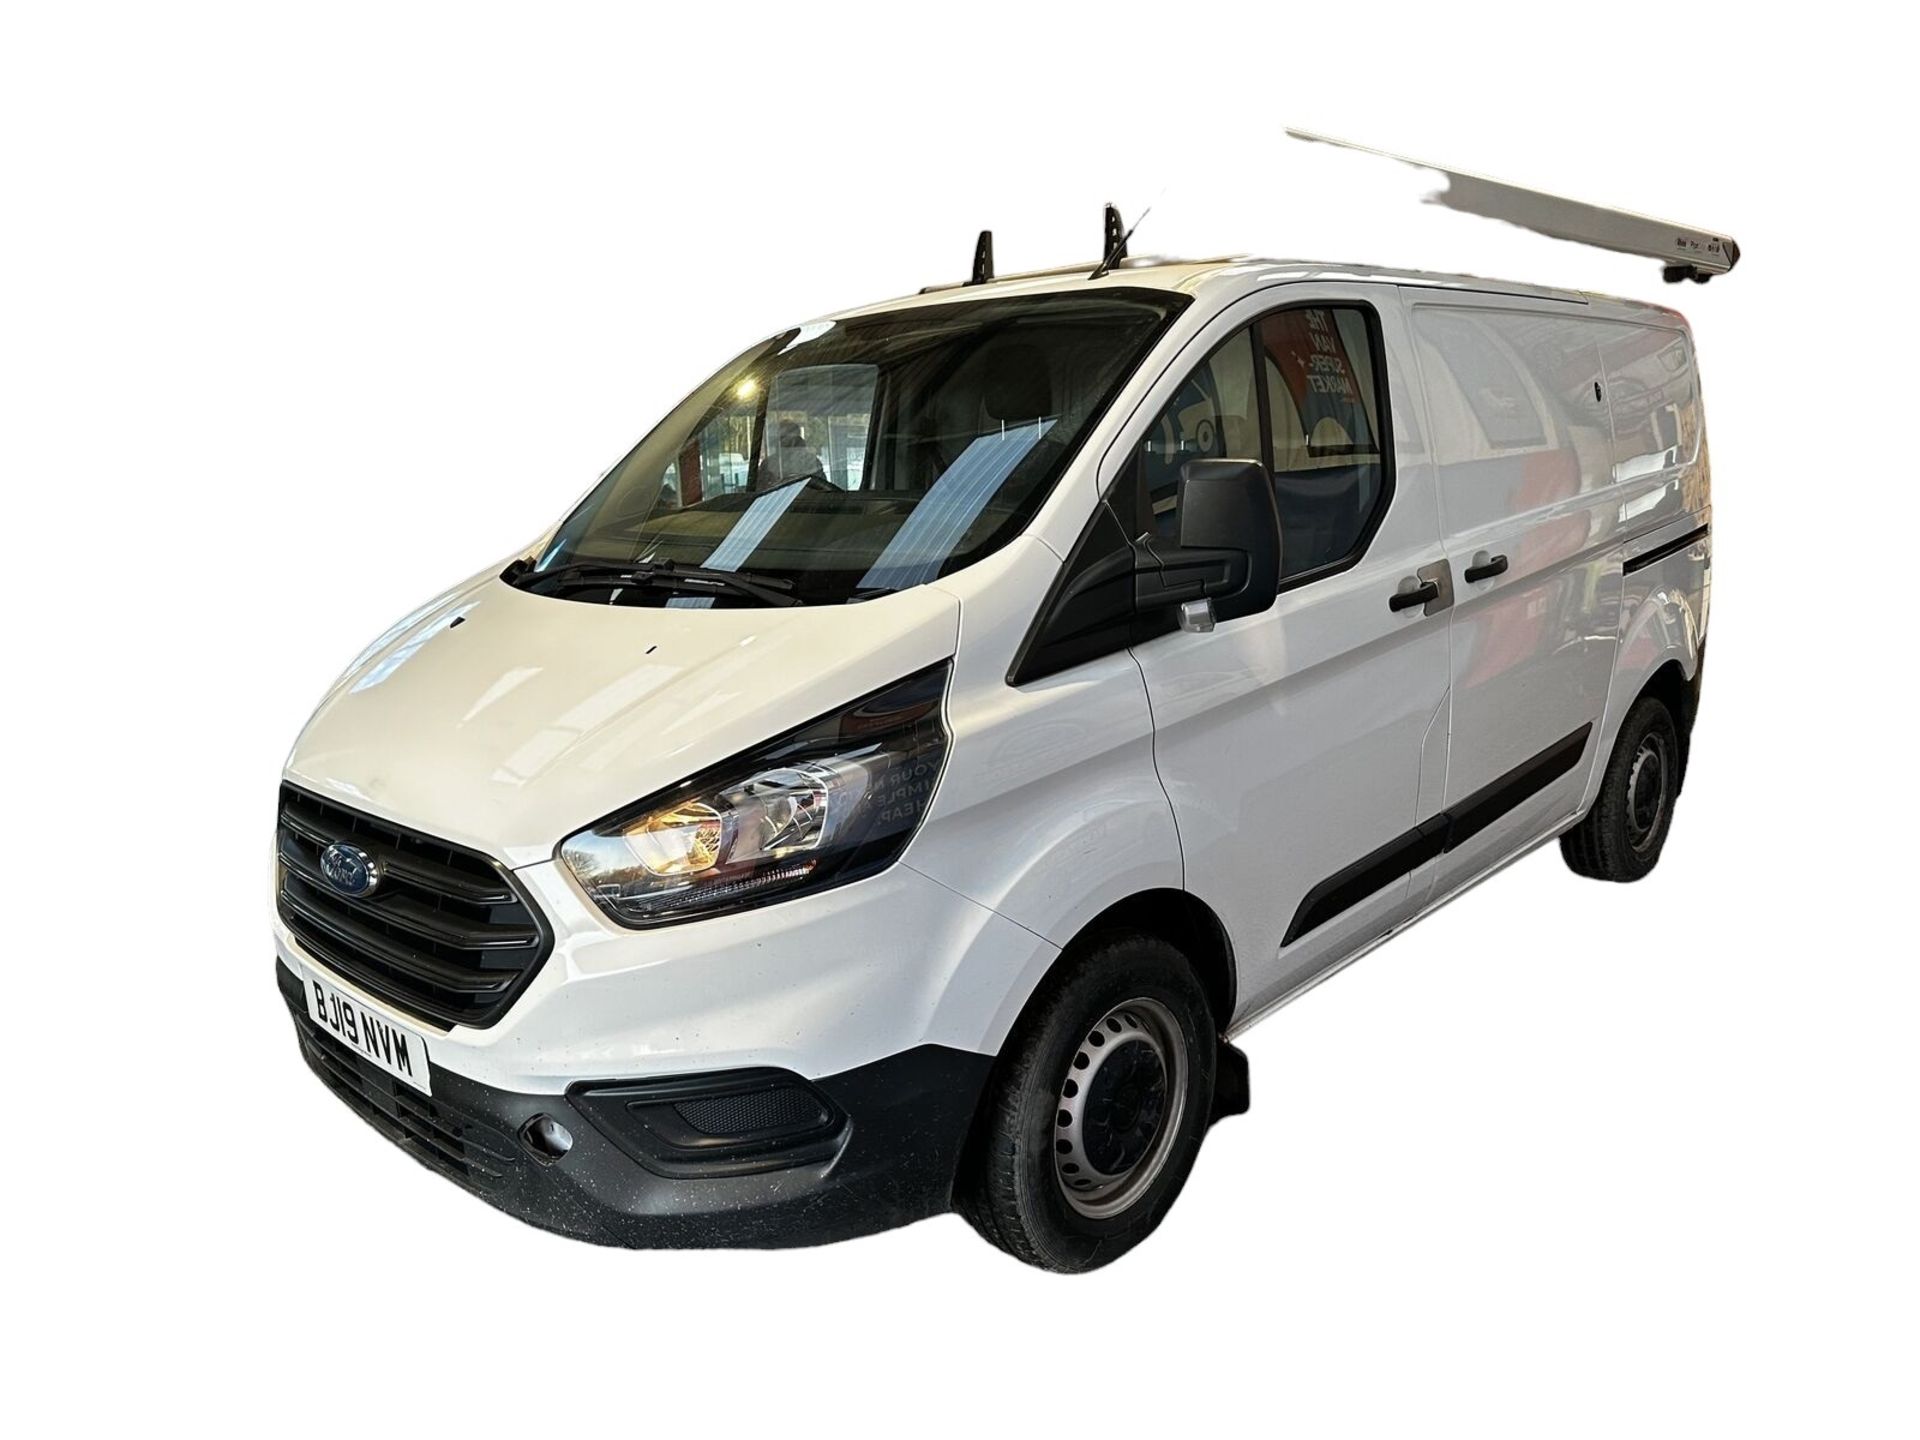 WHITE RHINO: 2019 FORD TRANSIT CUSTOM 300 - CLEAN, RELIABLE WORKHORSE